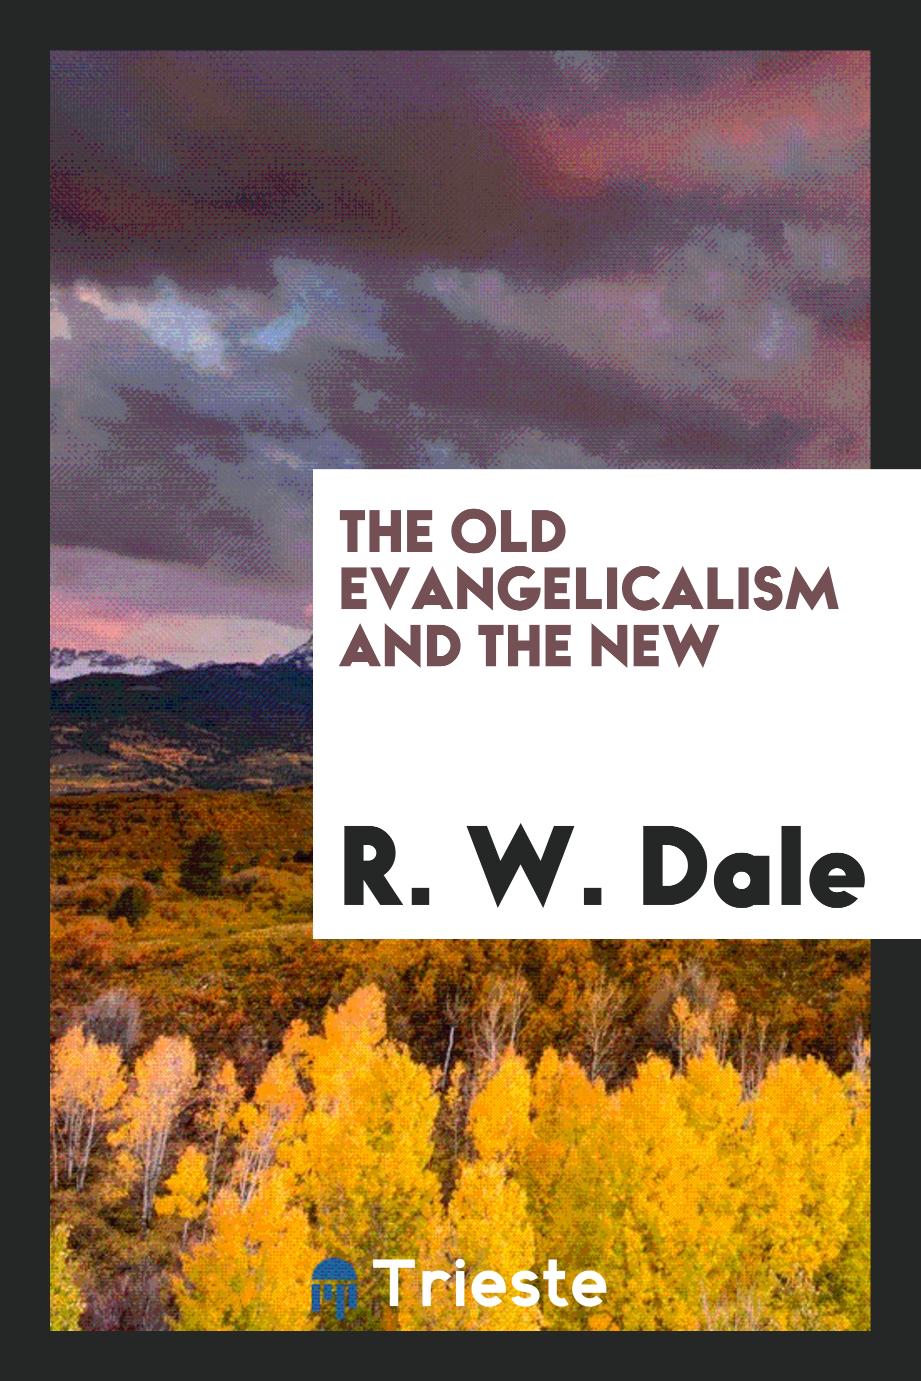 The Old Evangelicalism and the New